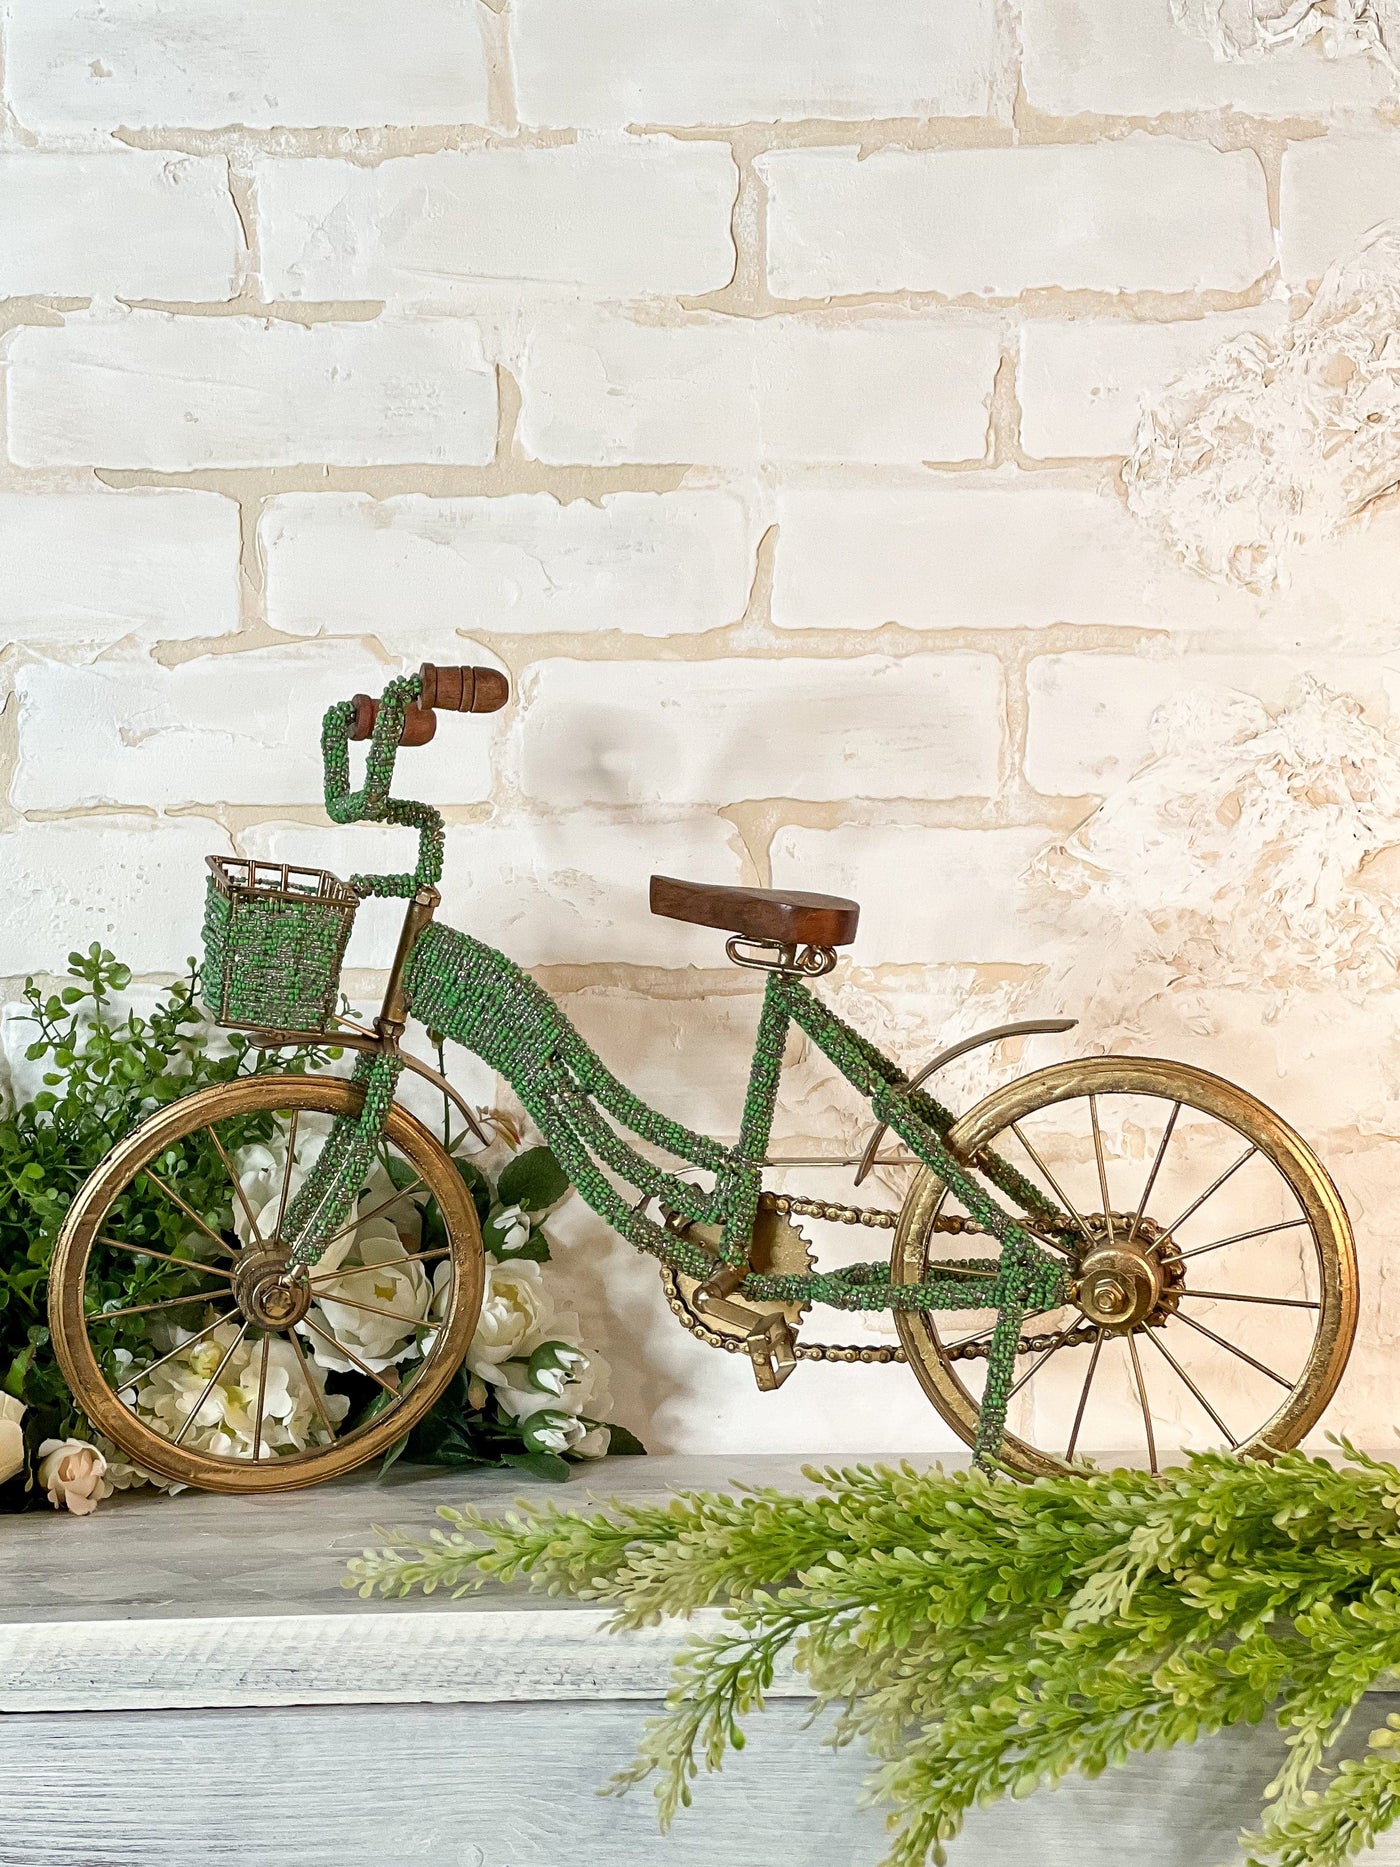 WHIMSICAL BEADED BICYCLE Revive In Style Vintage Furniture Painted Refinished Redesign Beautiful One of a Kind Artistic Antique Unique Home Decor Interior Design French Country Shabby Chic Cottage Farmhouse Grandmillenial Coastal Chalk Paint Metallic Glam Eclectic Quality Dovetailed Rustic Furniture Painter Pinterest Bedroom Living Room Entryway Kitchen Home Trends House Styles Decorating ideas